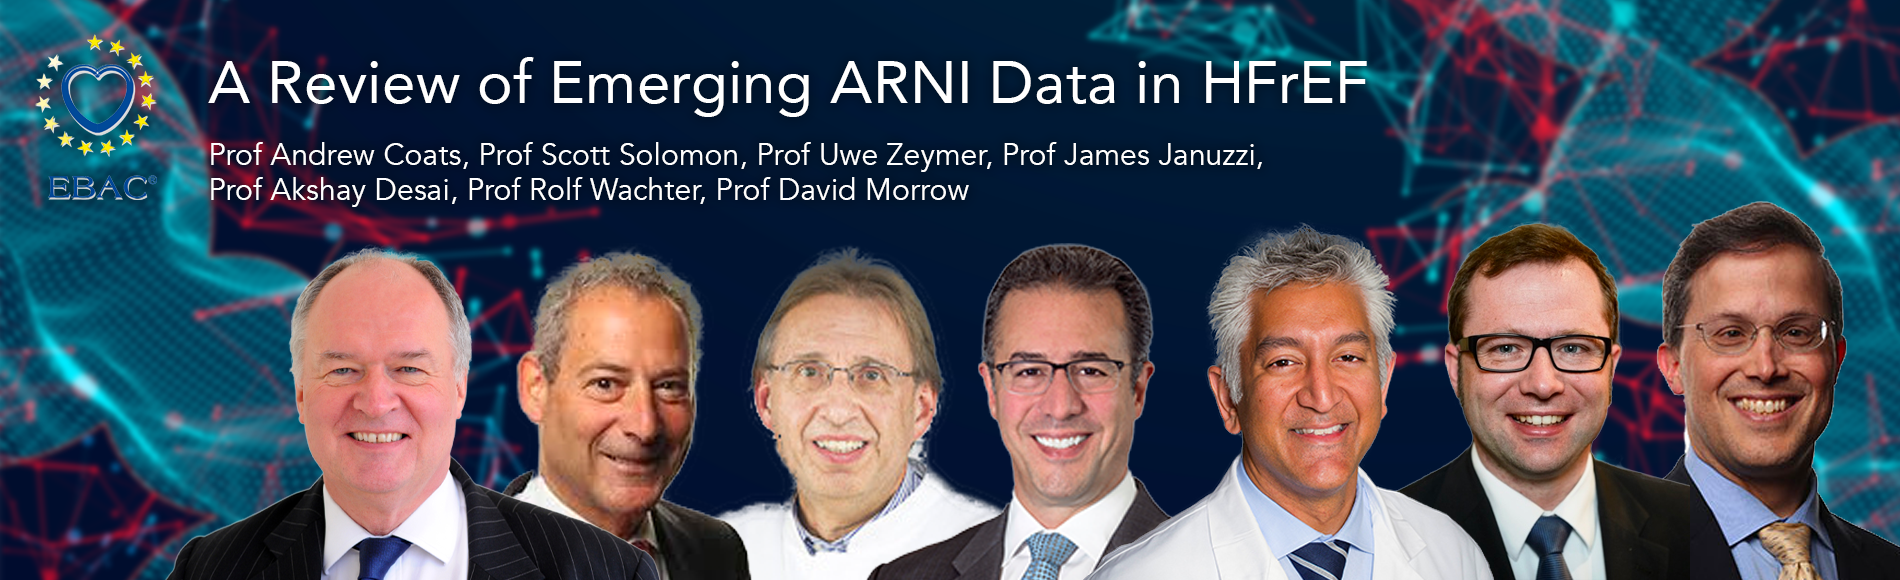 A Review of Emerging ARNI Data in HFrEF